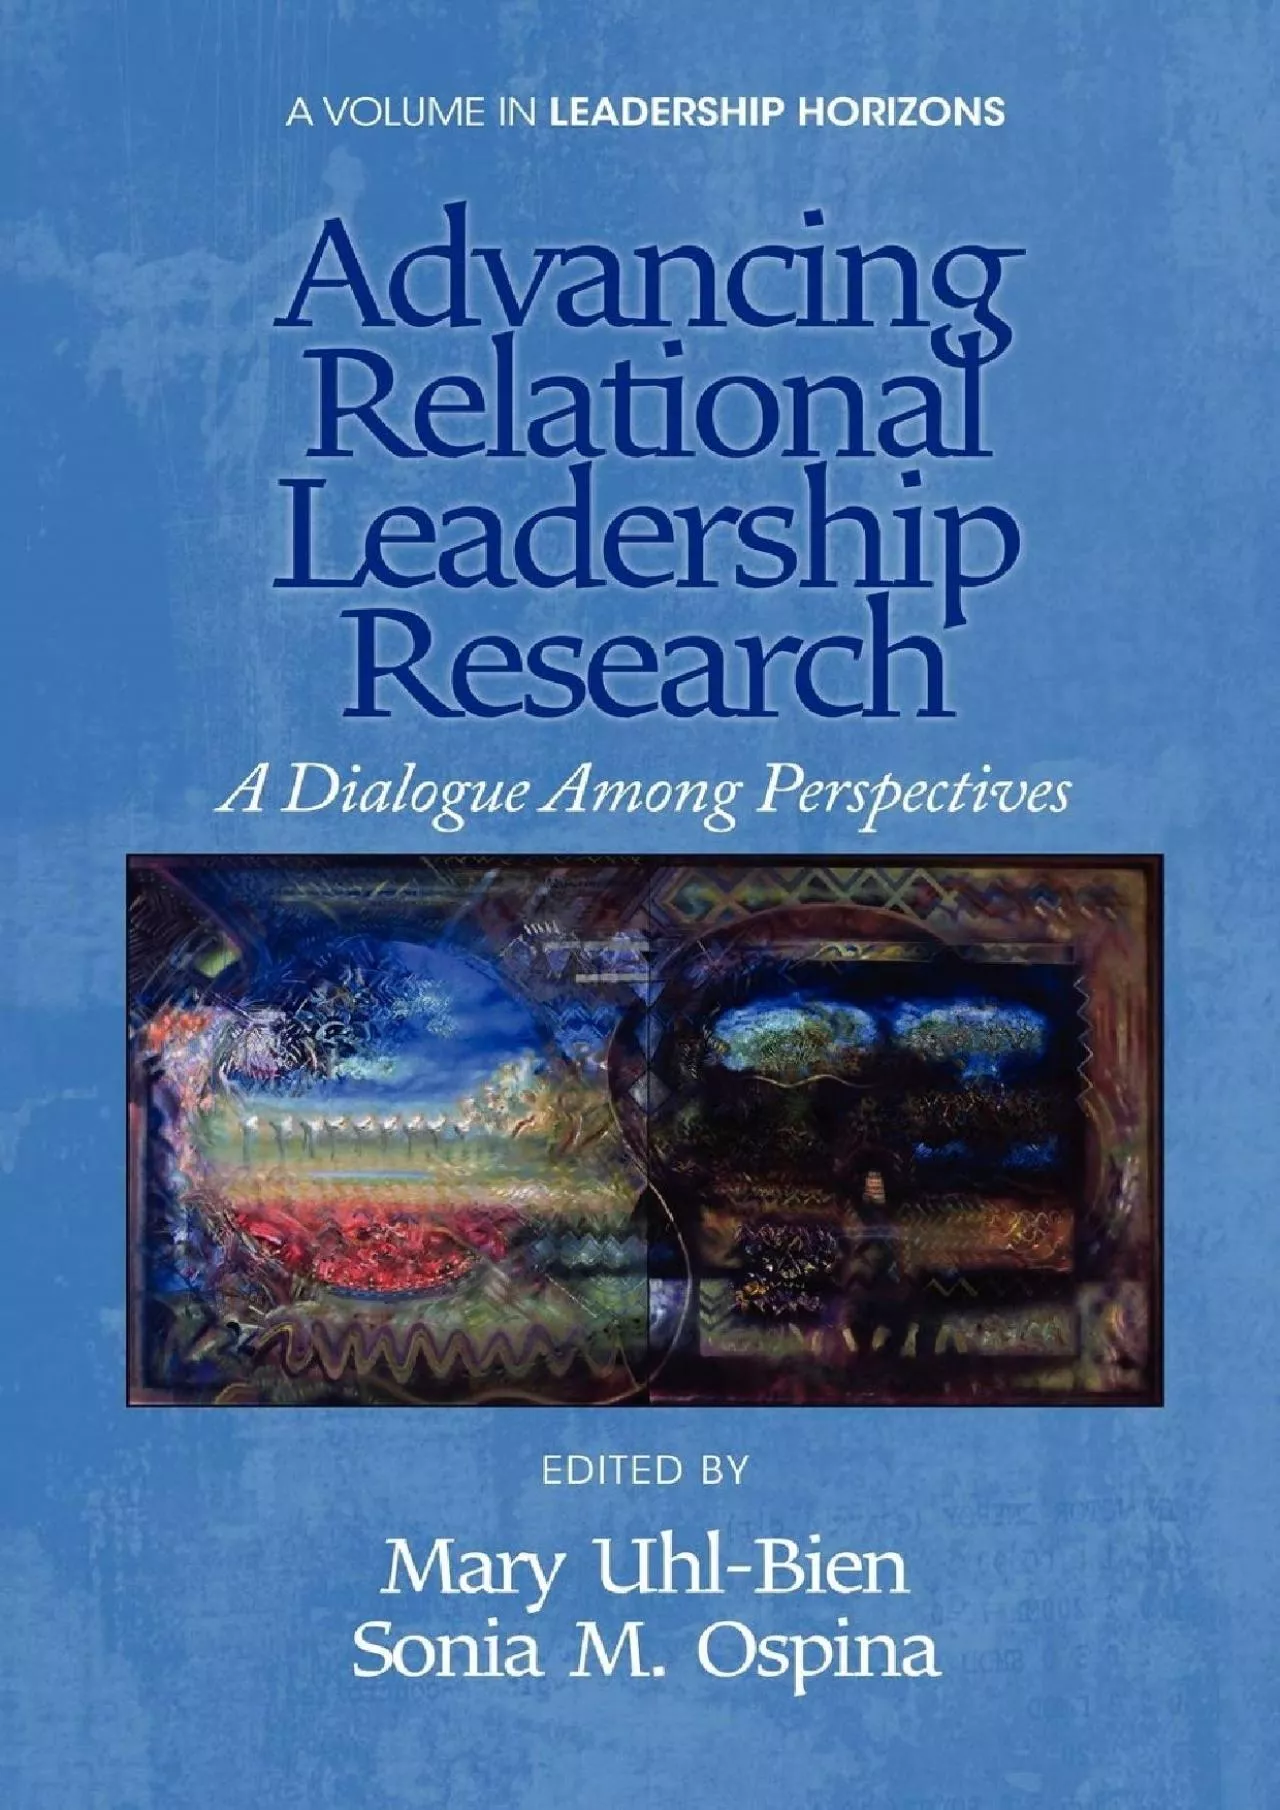 (EBOOK)-Advancing Relational Leadership Research: A Dialogue among Perspectives (Leadership